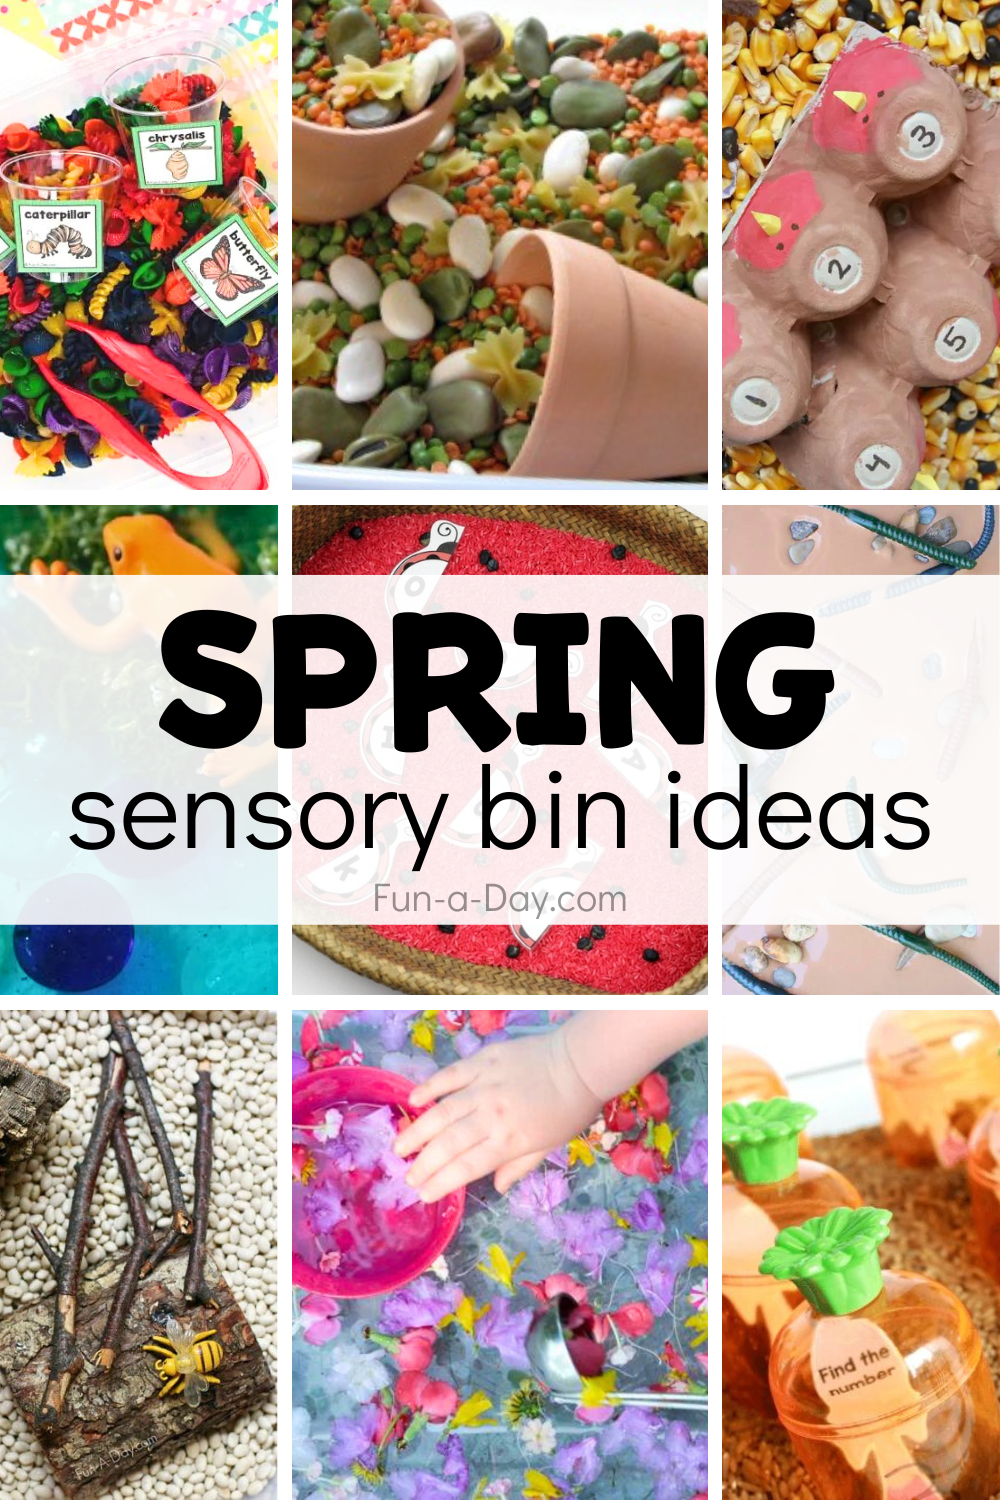 9 spring sensory bin ideas with text that reads spring sensory bin ideas.